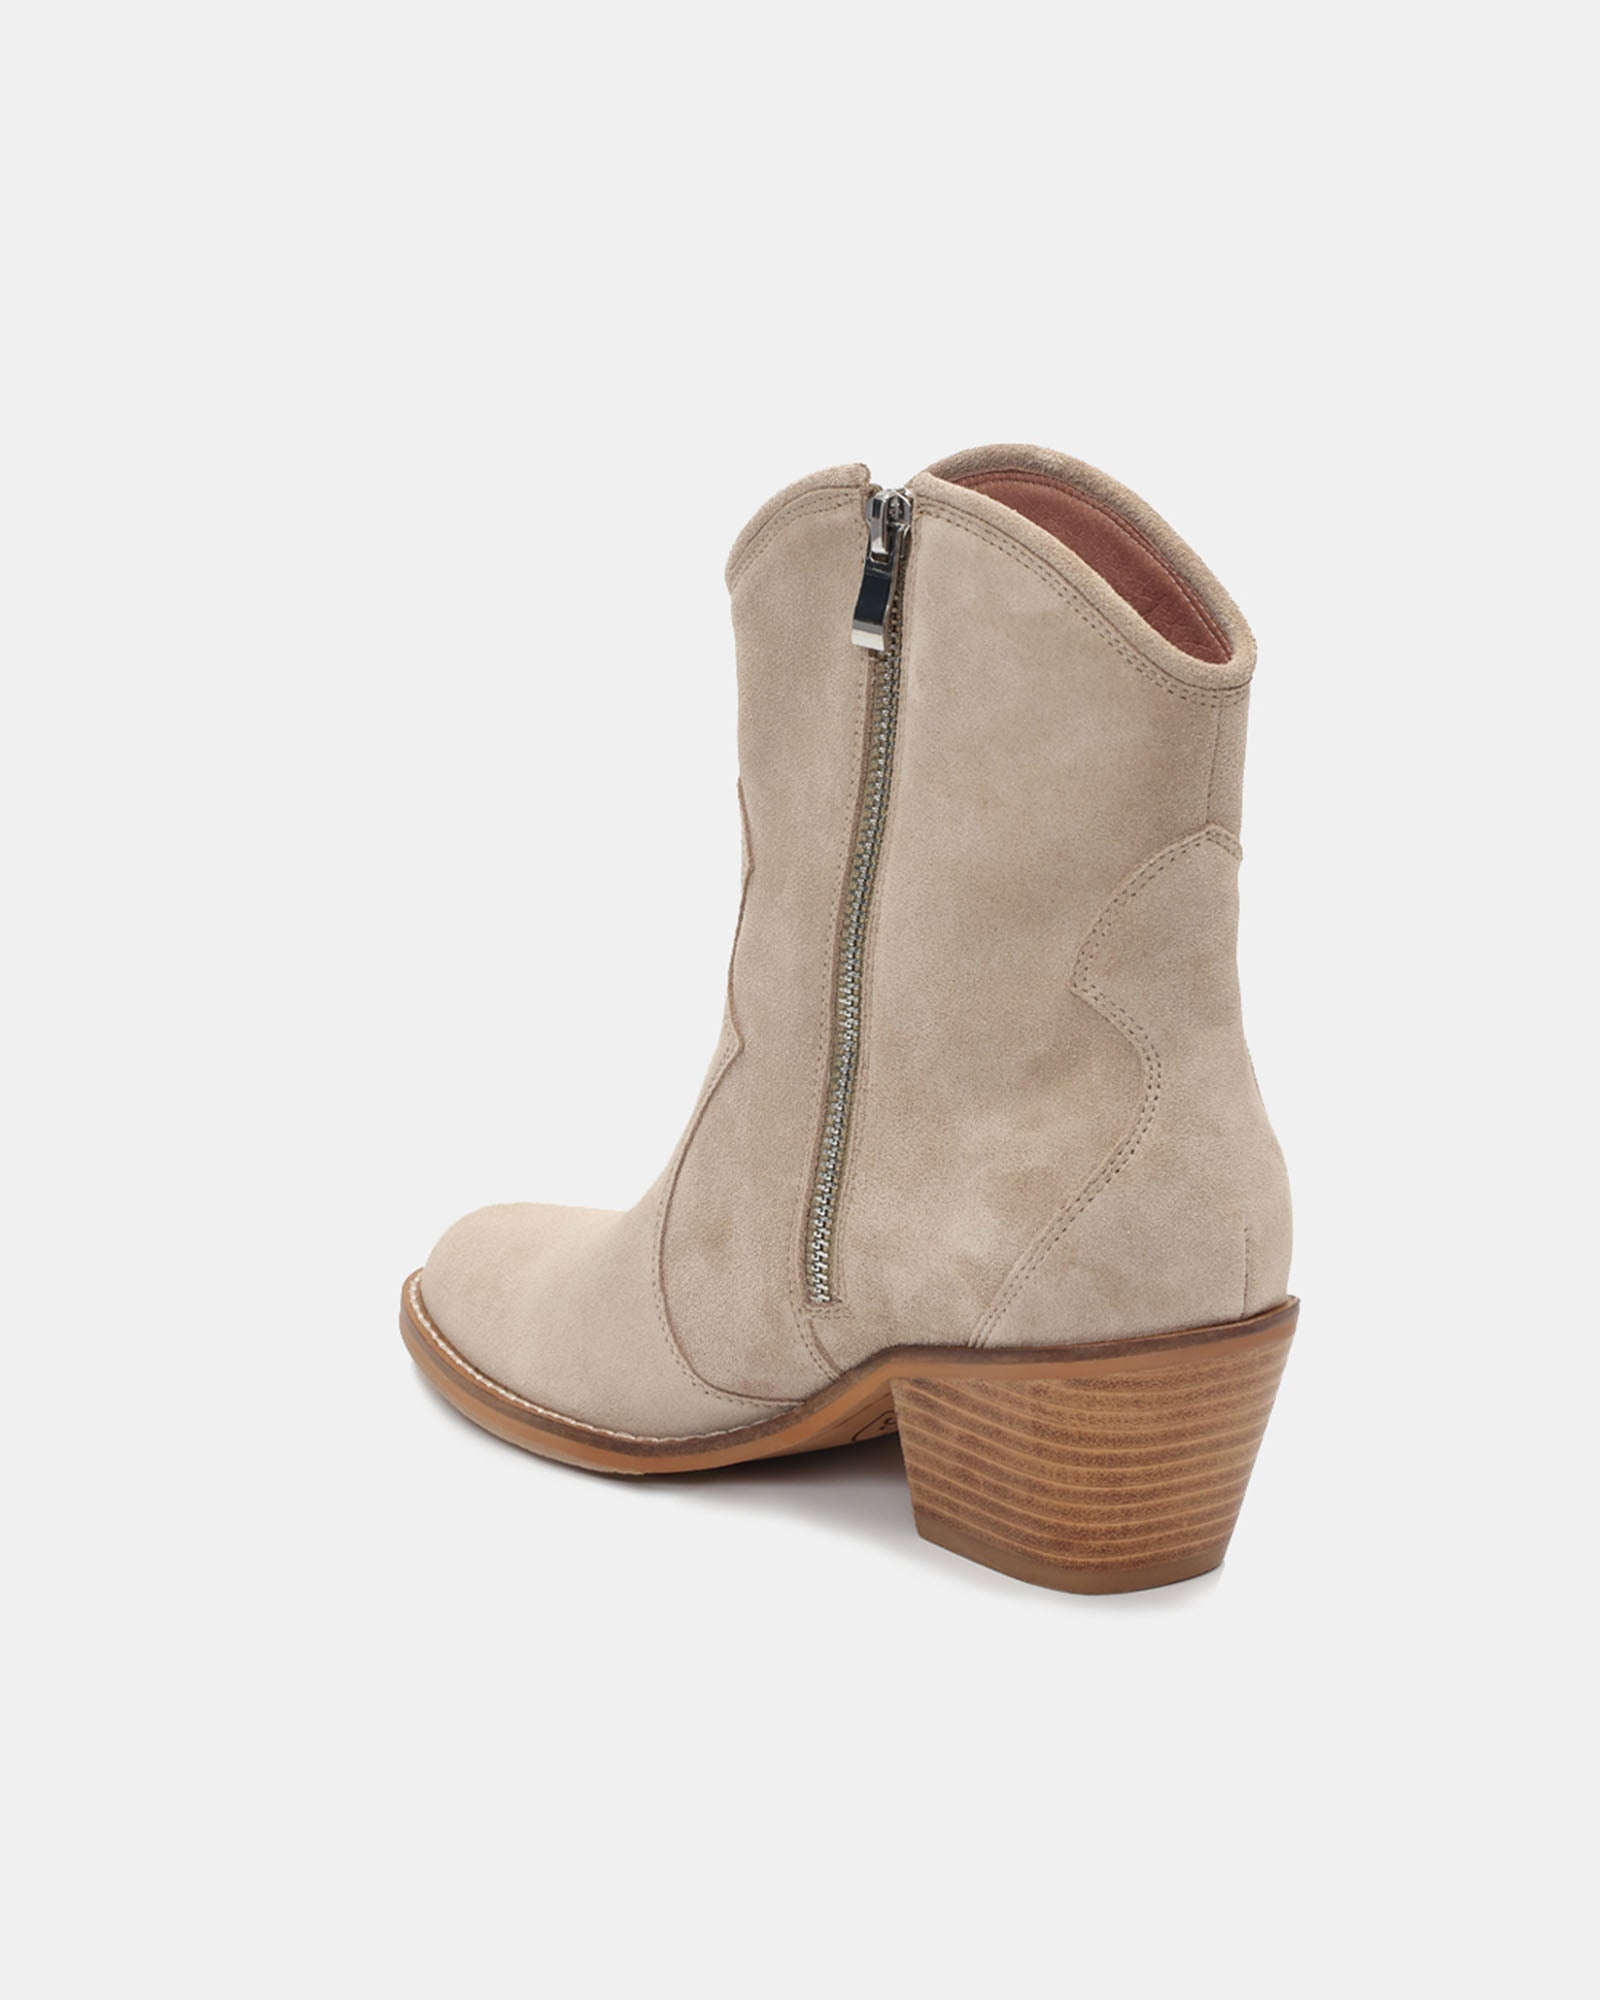 Shania Western Ankle Boots